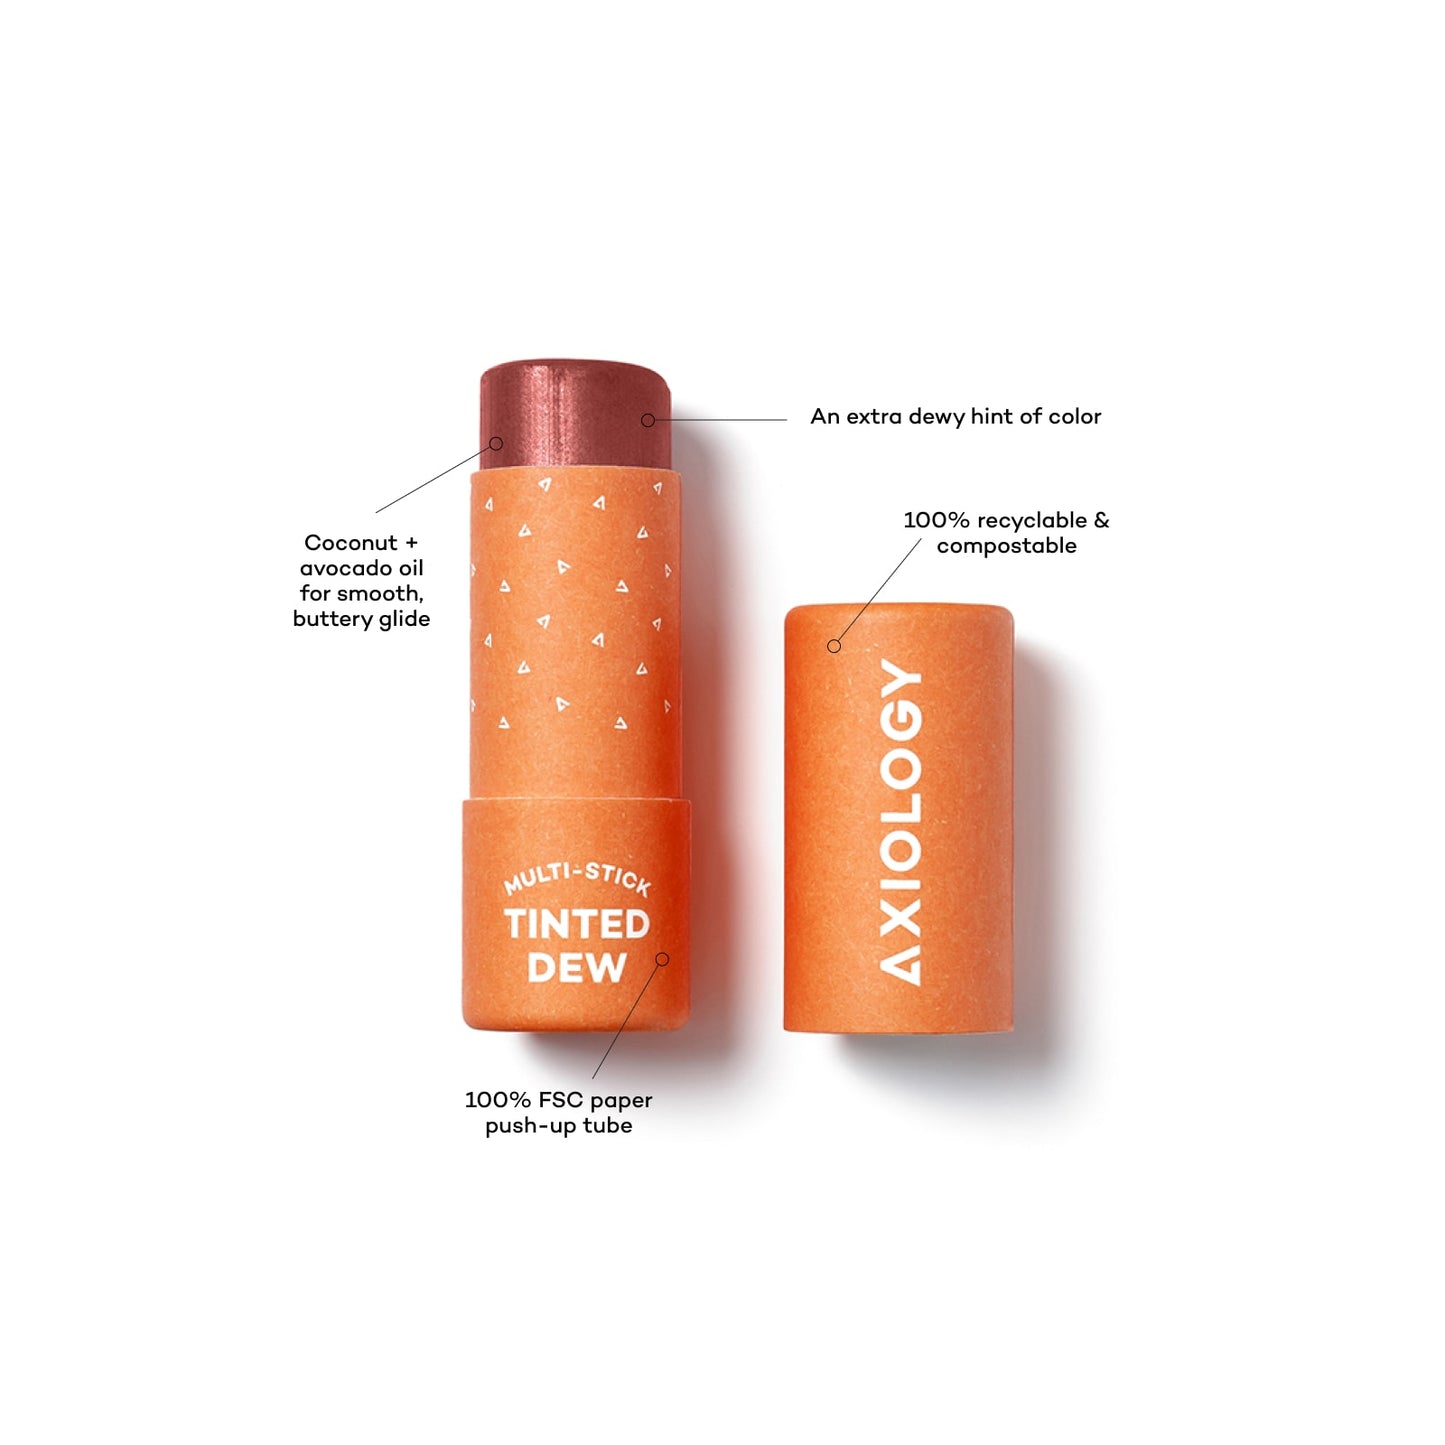 AXIOLOGY-Multi-Stick-Tinted-Dew-Infinite